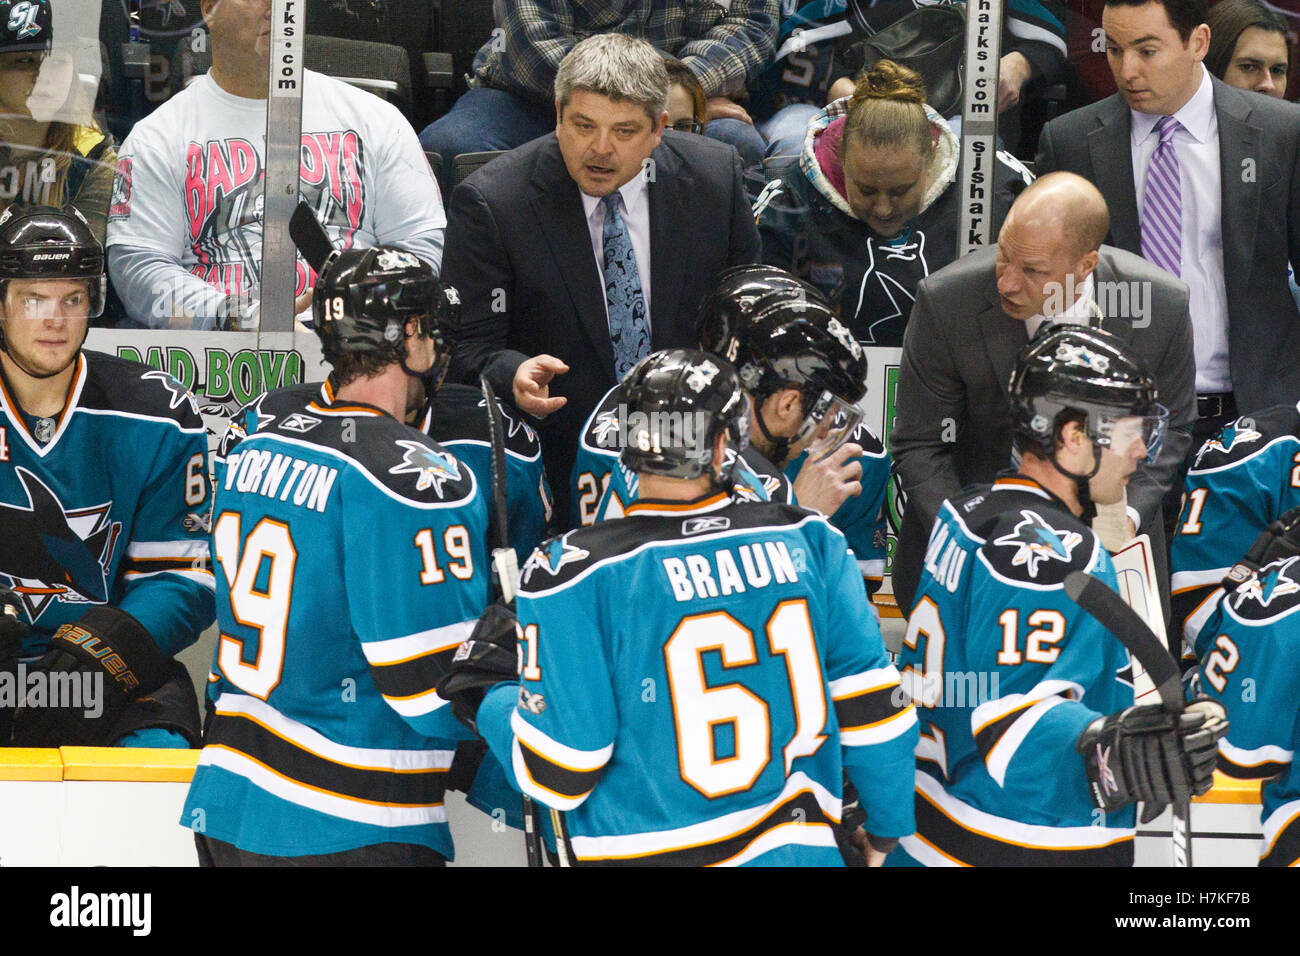 January 11, 2011; San Jose, CA, USA; San Jose Sharks head coach Todd McLellan talks to his team during a timeout against the Toronto Maple Leafs during the third period at HP Pavilion. Toronto defeated San Jose 4-2. Stock Photo